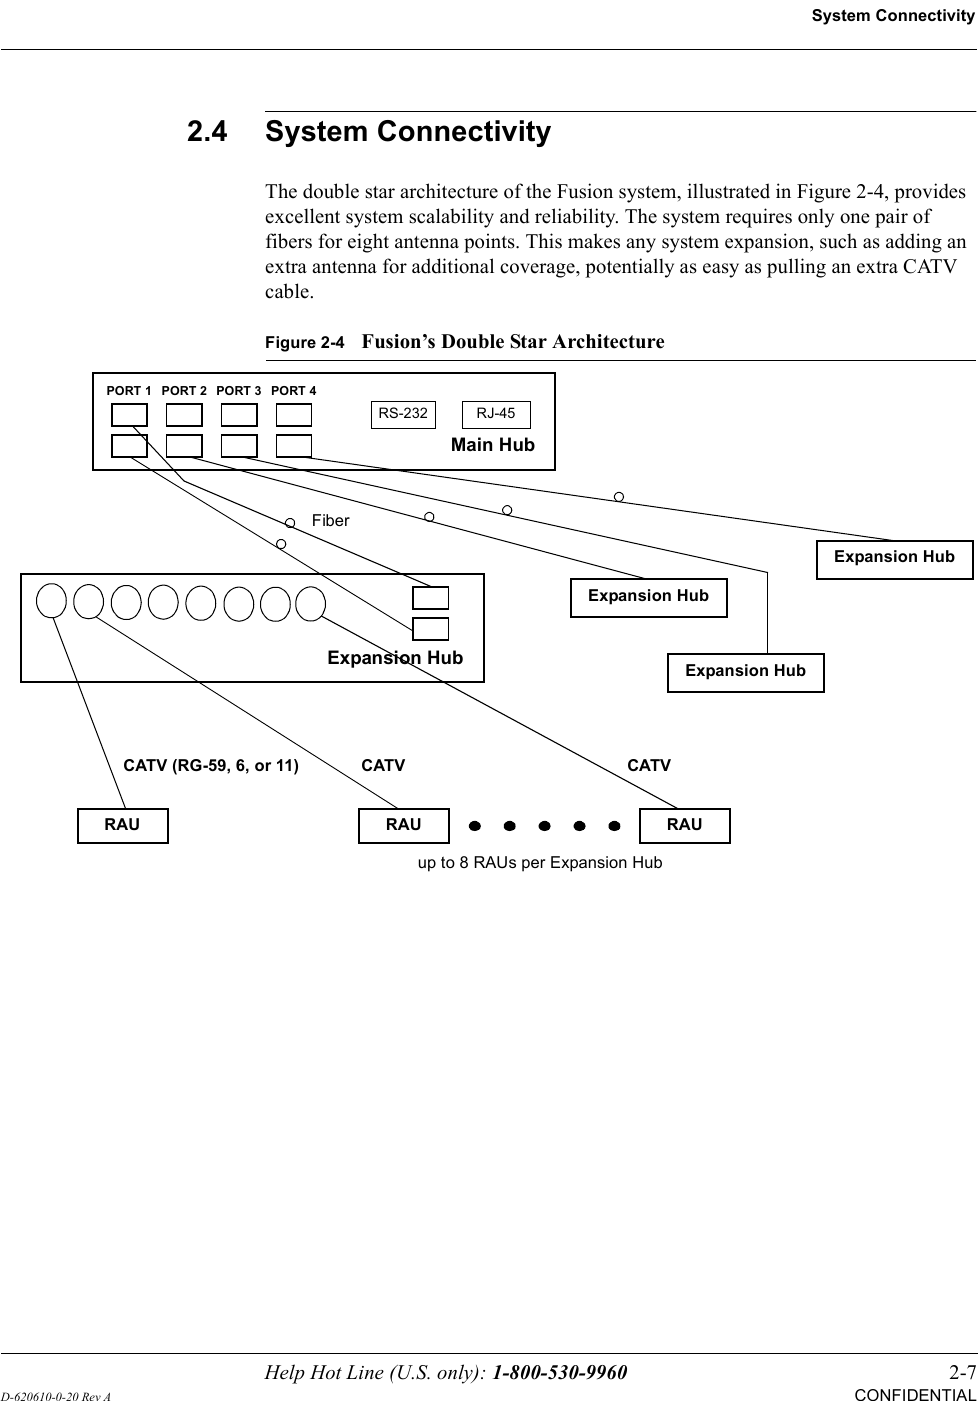 Help Hot Line (U.S. only): 1-800-530-9960 2-7D-620610-0-20 Rev ACONFIDENTIALSystem Connectivity2.4 System ConnectivityThe double star architecture of the Fusion system, illustrated in Figure 2-4, provides excellent system scalability and reliability. The system requires only one pair of fibers for eight antenna points. This makes any system expansion, such as adding an extra antenna for additional coverage, potentially as easy as pulling an extra CATV cable.Figure 2-4Fusion’s Double Star ArchitectureMain HubRS-232PORT 1 PORT 2 PORT 3 PORT 4Expansion HubExpansion HubFiberExpansion HubExpansion HubCATVCATV (RG-59, 6, or 11) CATVup to 8 RAUs per Expansion HubRAU RAU RAURJ-45